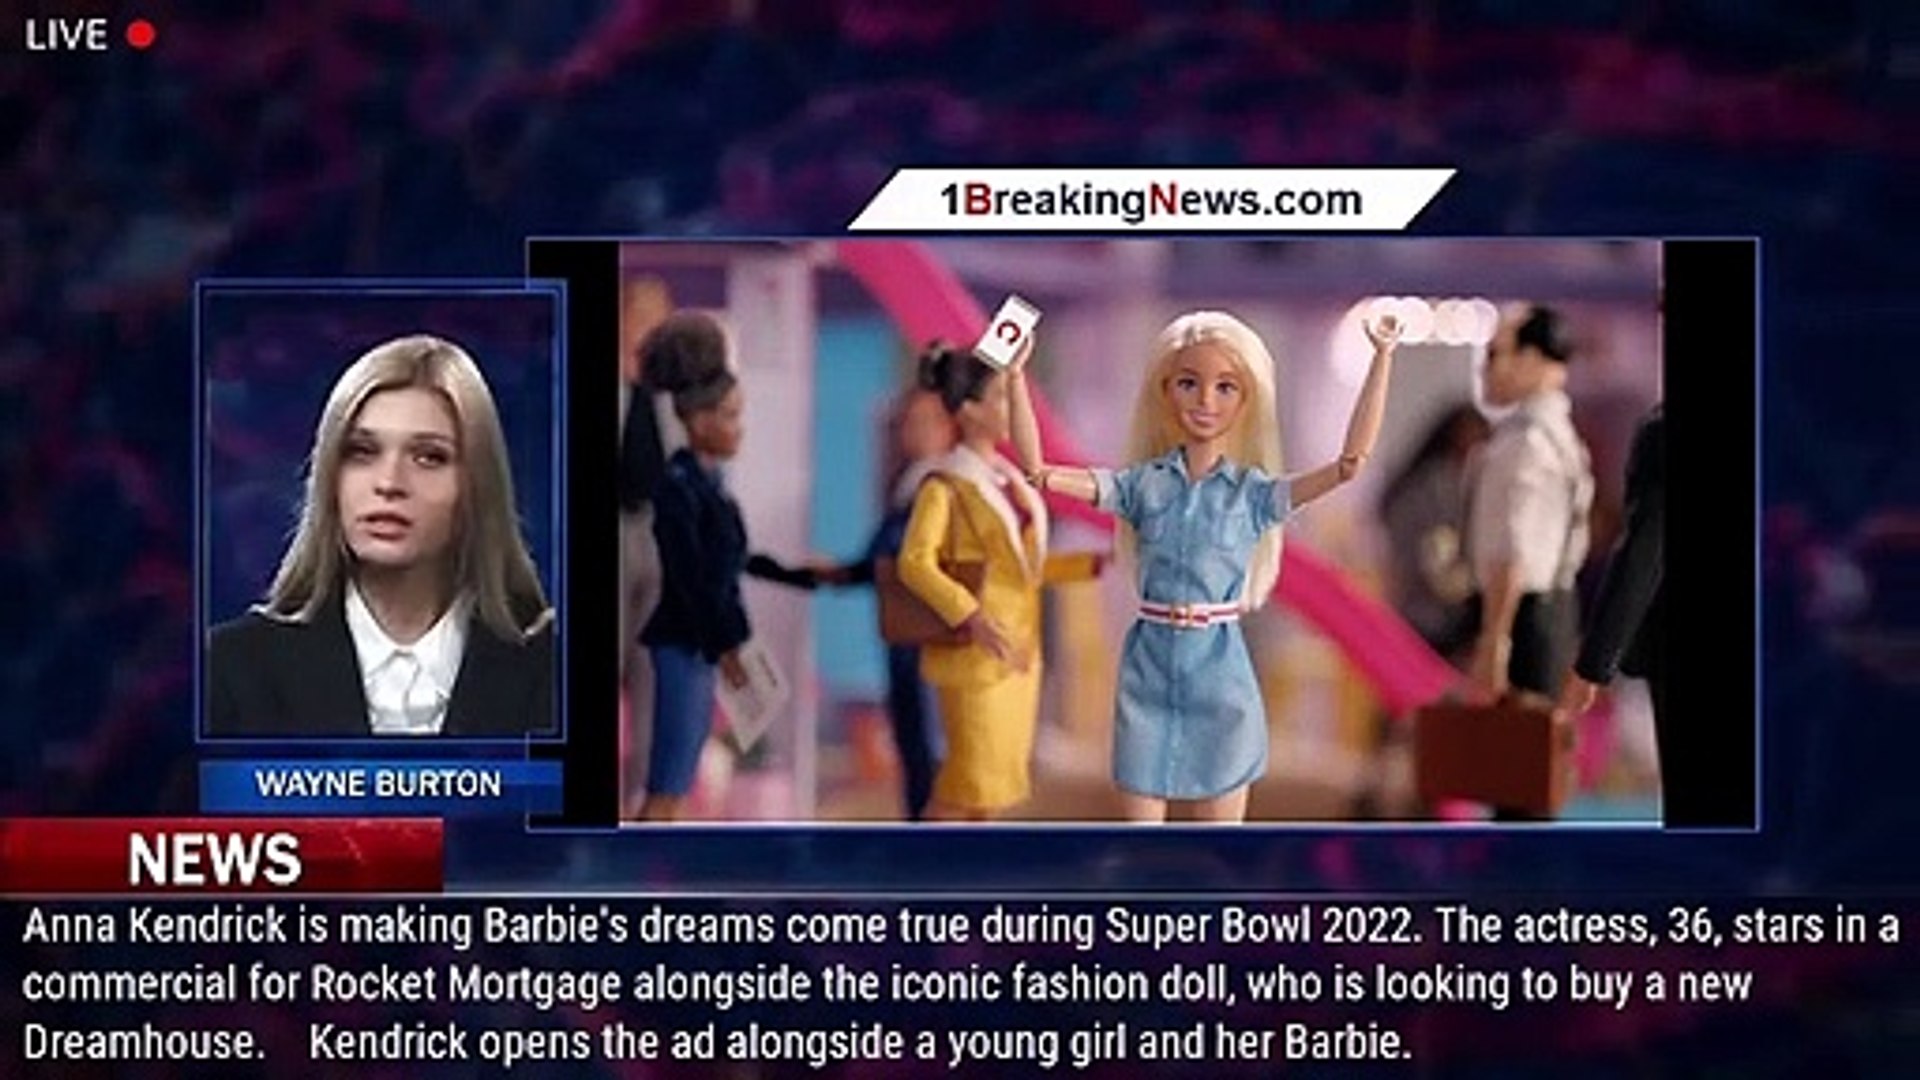 Anna Kendrick Helps Barbie Land New Dreamhouse in Super Bowl 2022 Ad for Rocket  Mortgage - 1breaking - video Dailymotion